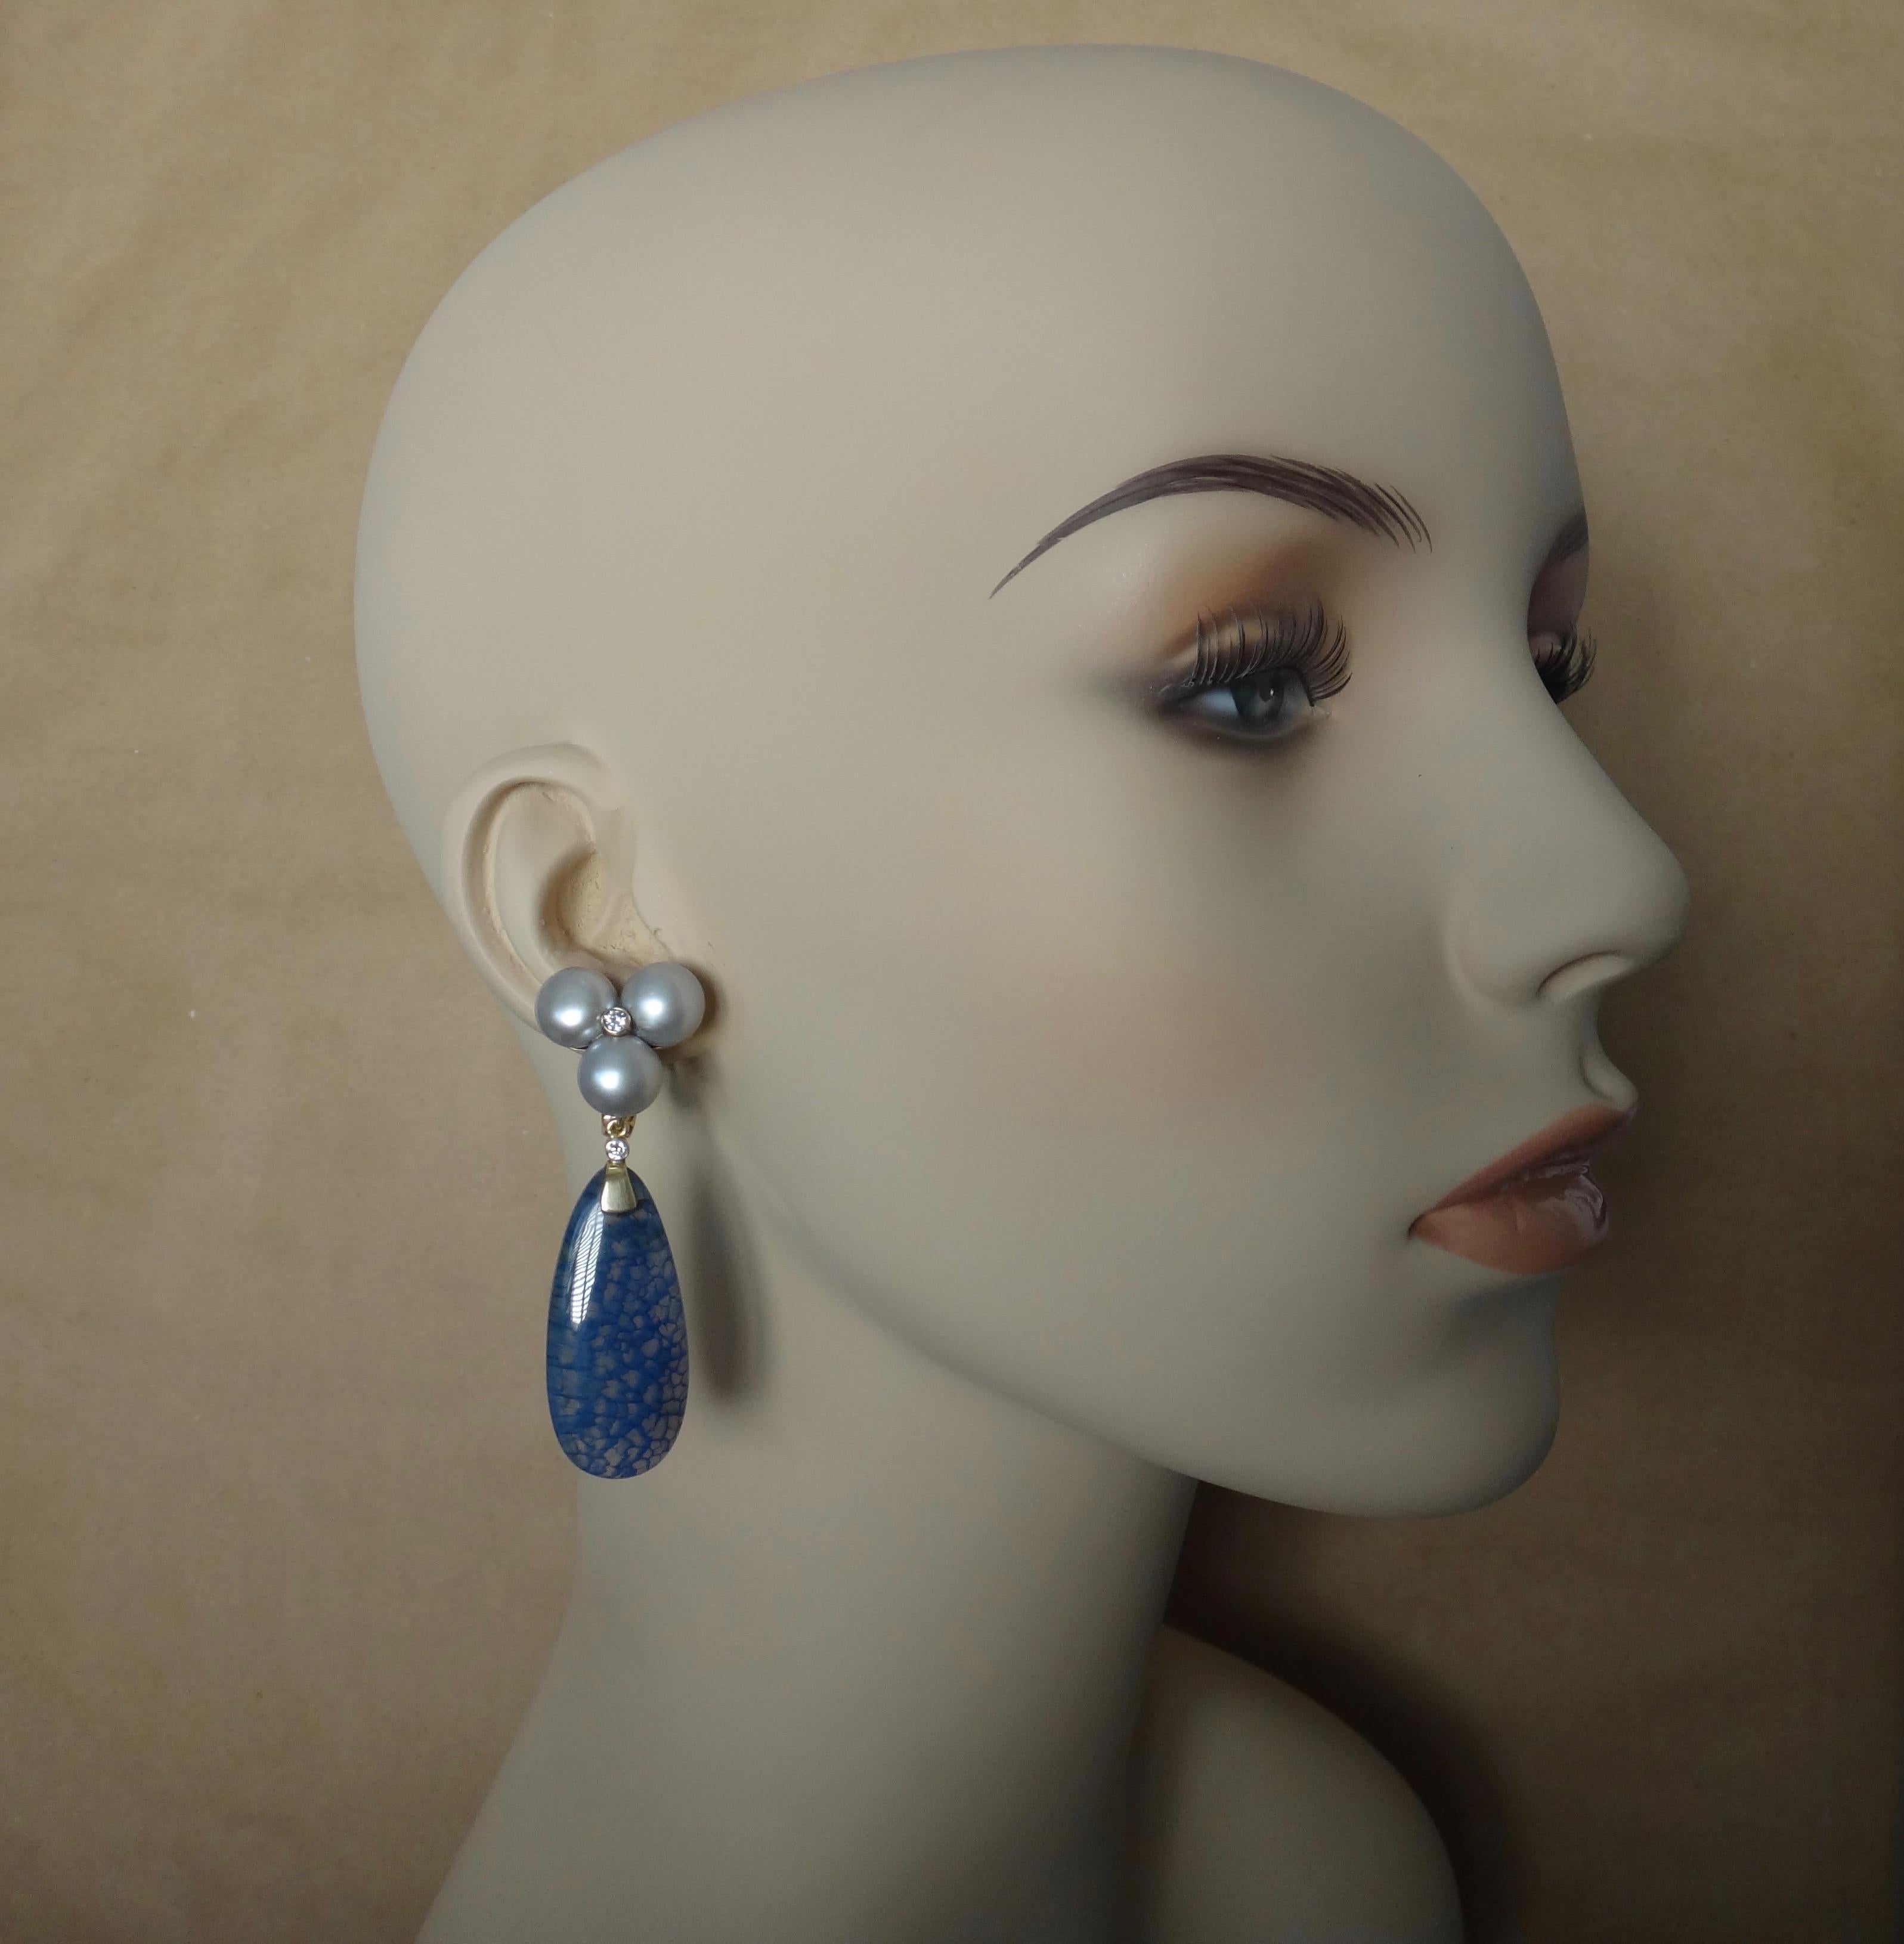 Blue Dragon's Skin agate (origin: China) pendants are removable in these bold dangle earrings.  The blue patterns are evenly distributed across the drops which are well polished and highlighted with a bezel set diamond in each.  The drops hang from